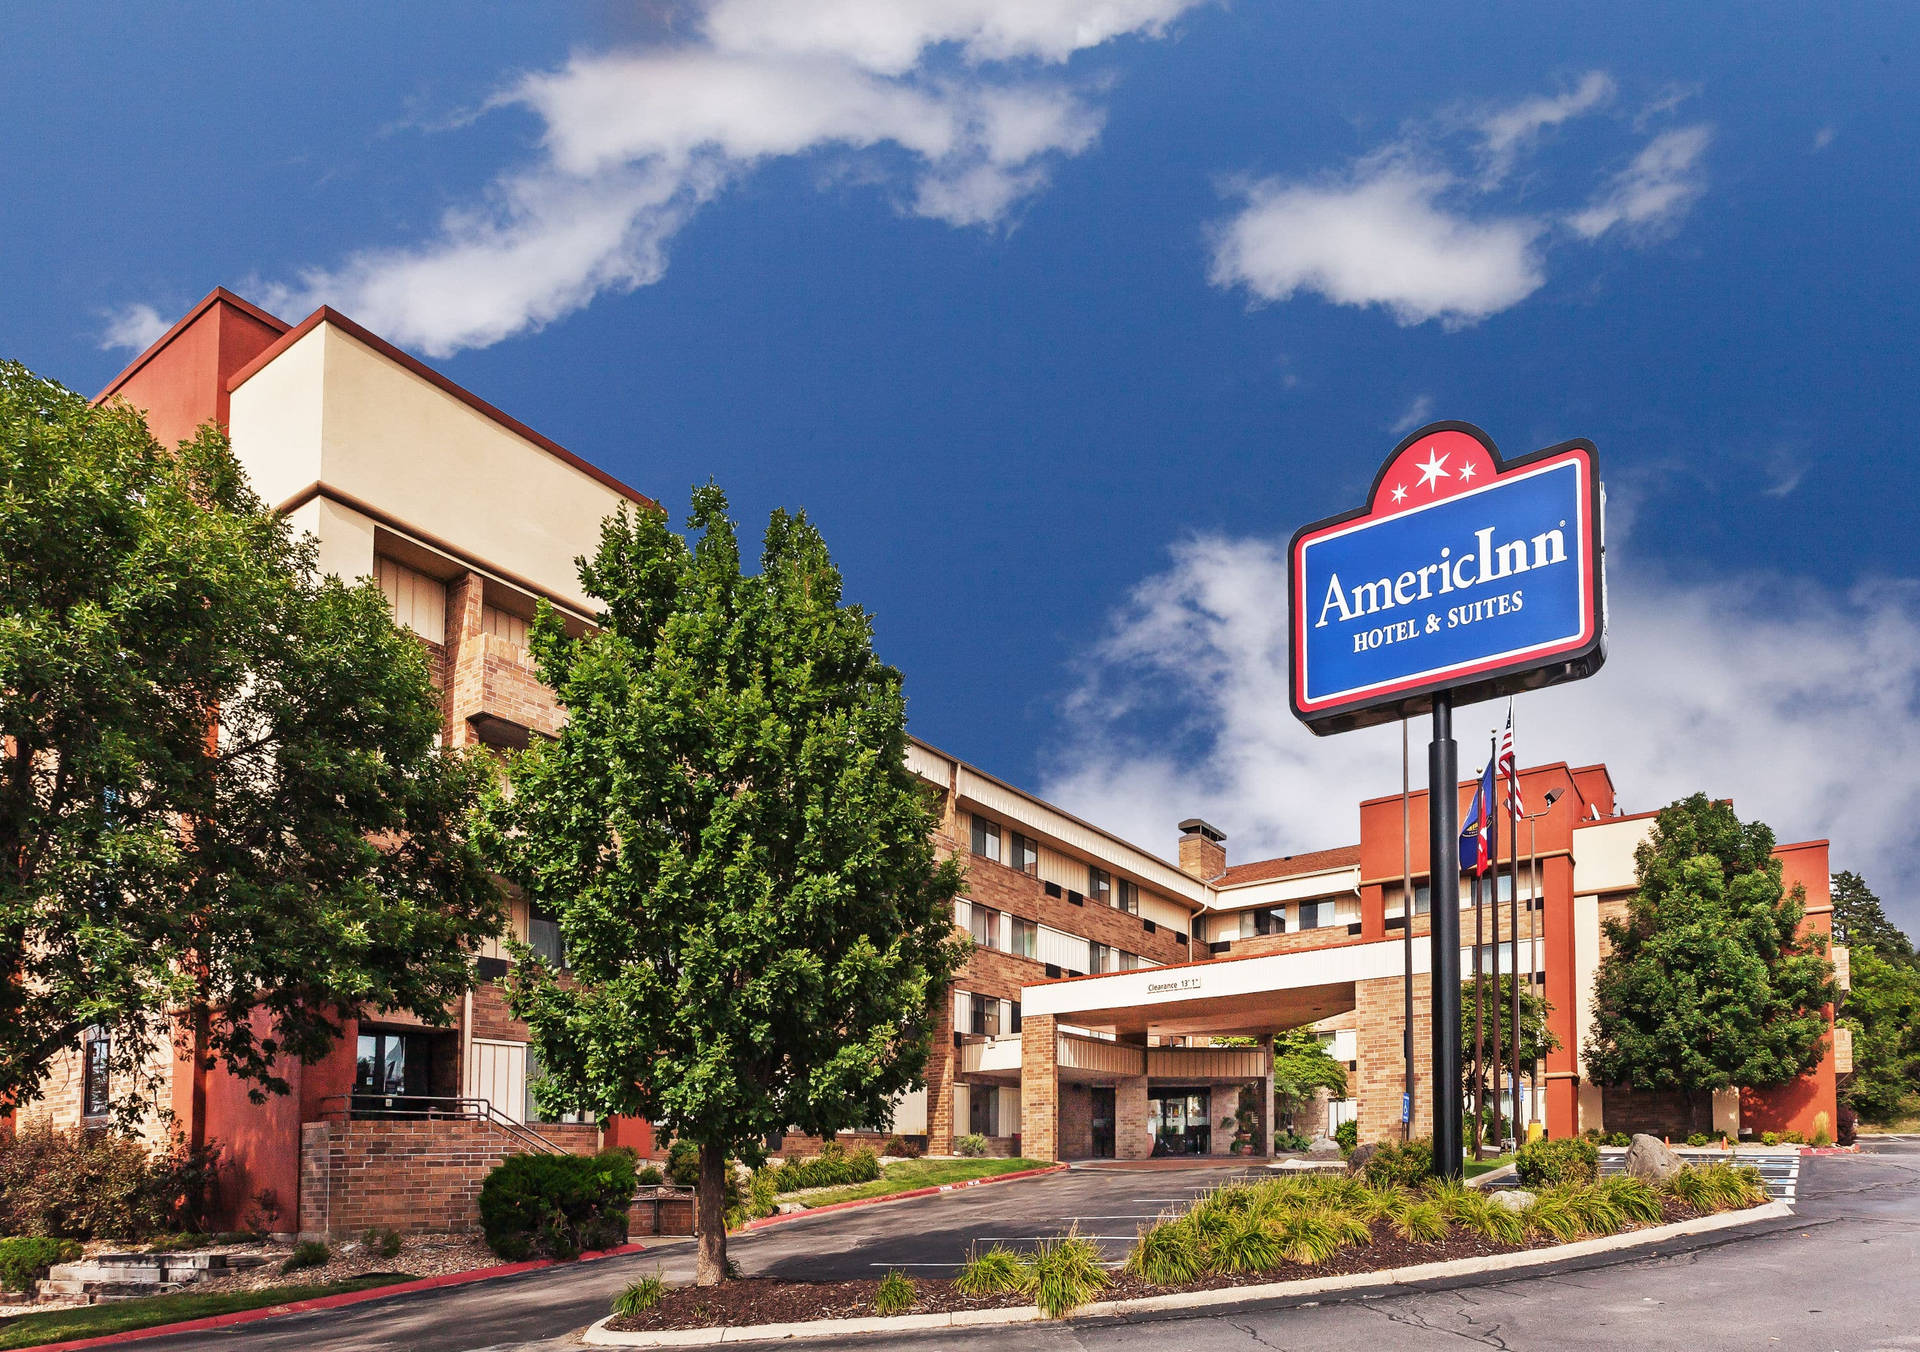 Americinnby Wyndham Omaha Does Not Require A Reservation. However, We Recommend Contacting The Hotel In Advance To Check Availability. Fondo de pantalla